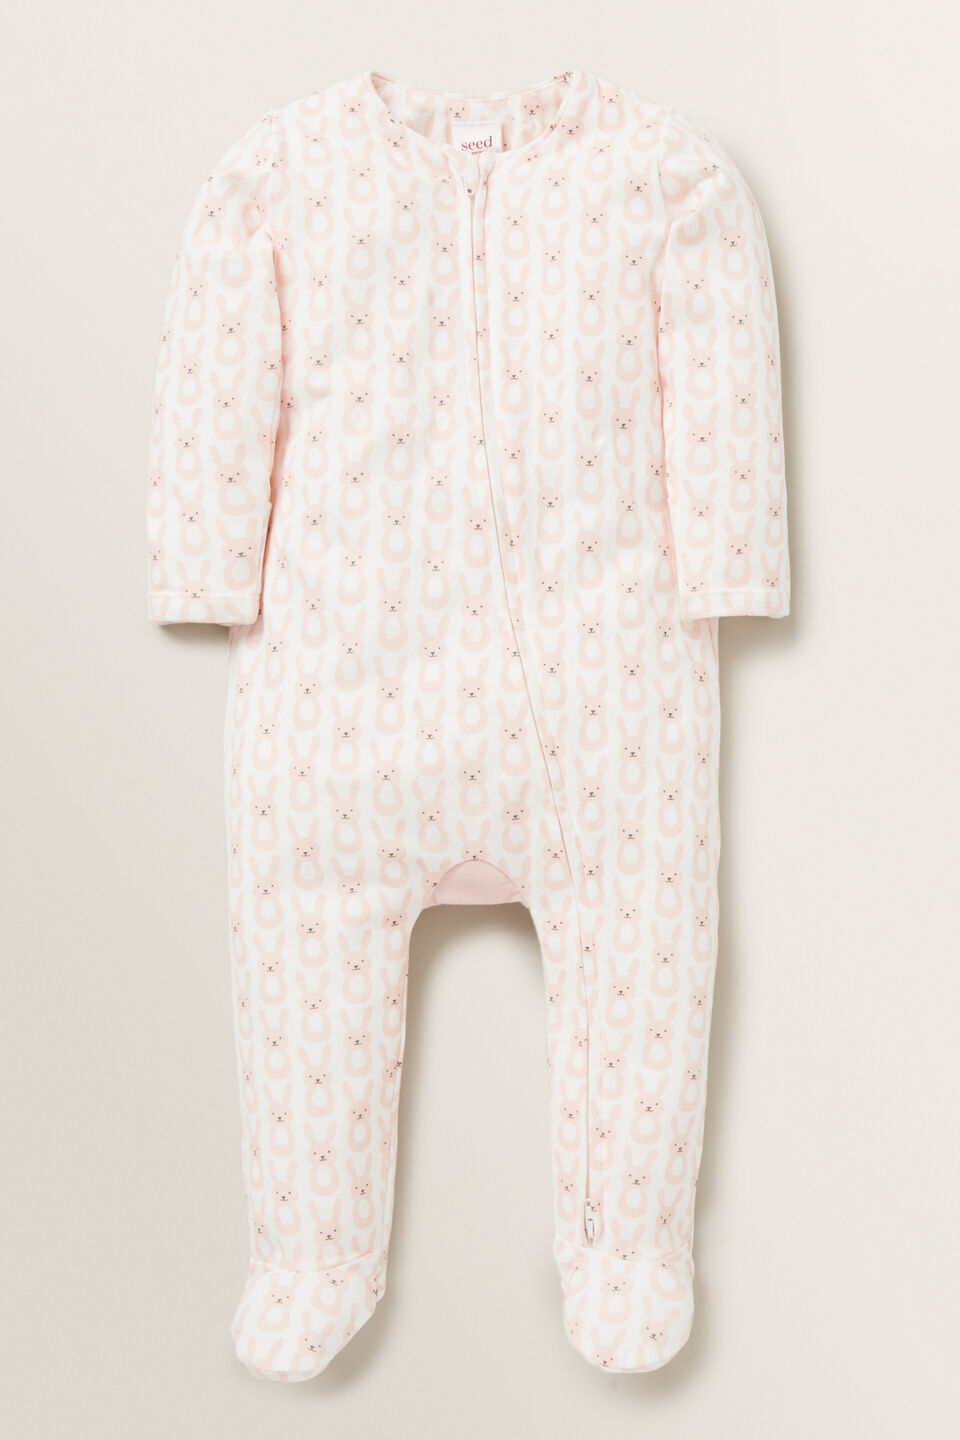 Bunny Bum Zipsuit (Available in size 00000)  